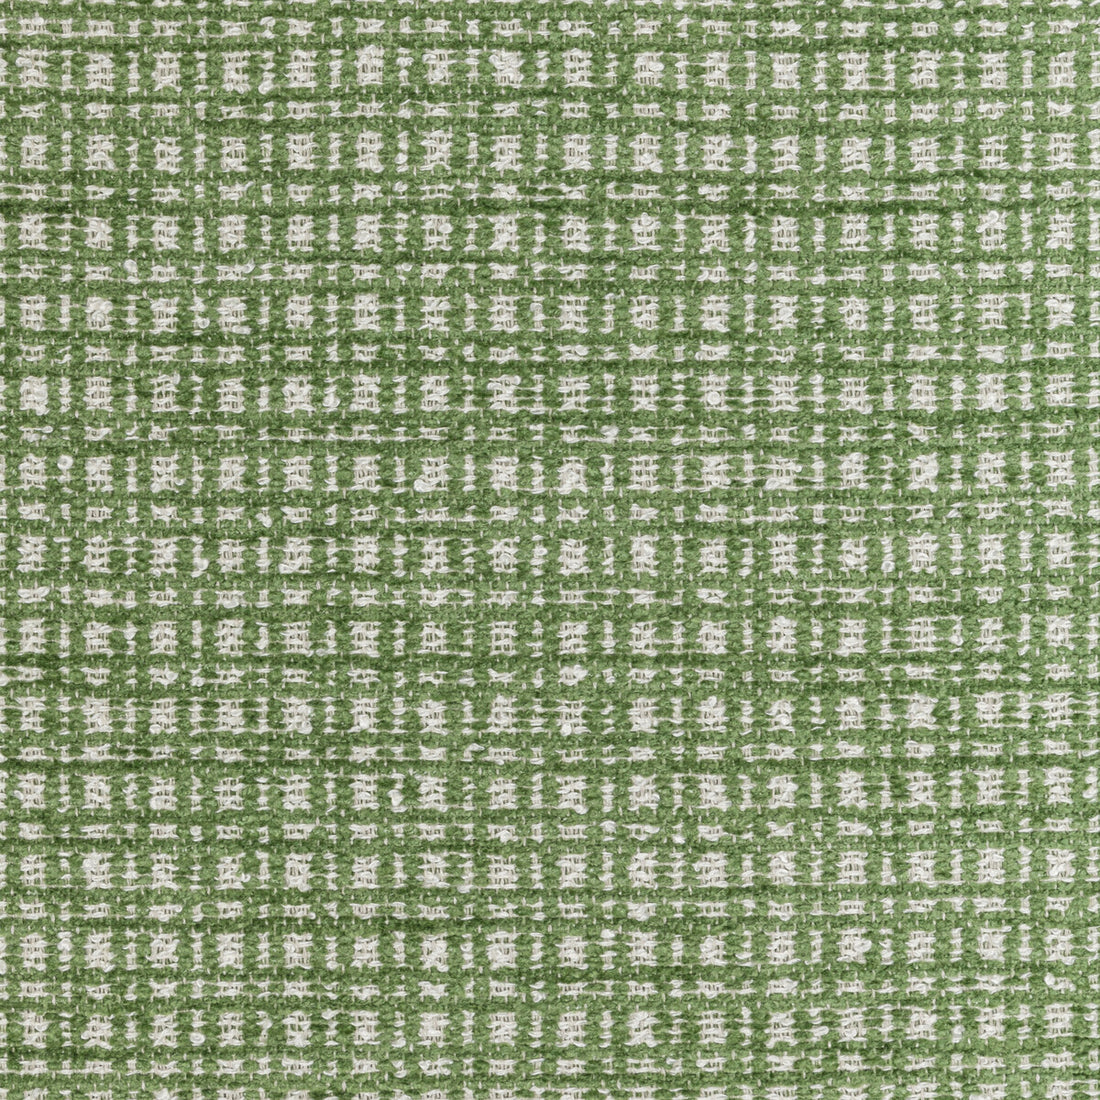 Landiers Texture fabric in green color - pattern 8022123.3.0 - by Brunschwig &amp; Fils in the Chambery Textures III collection